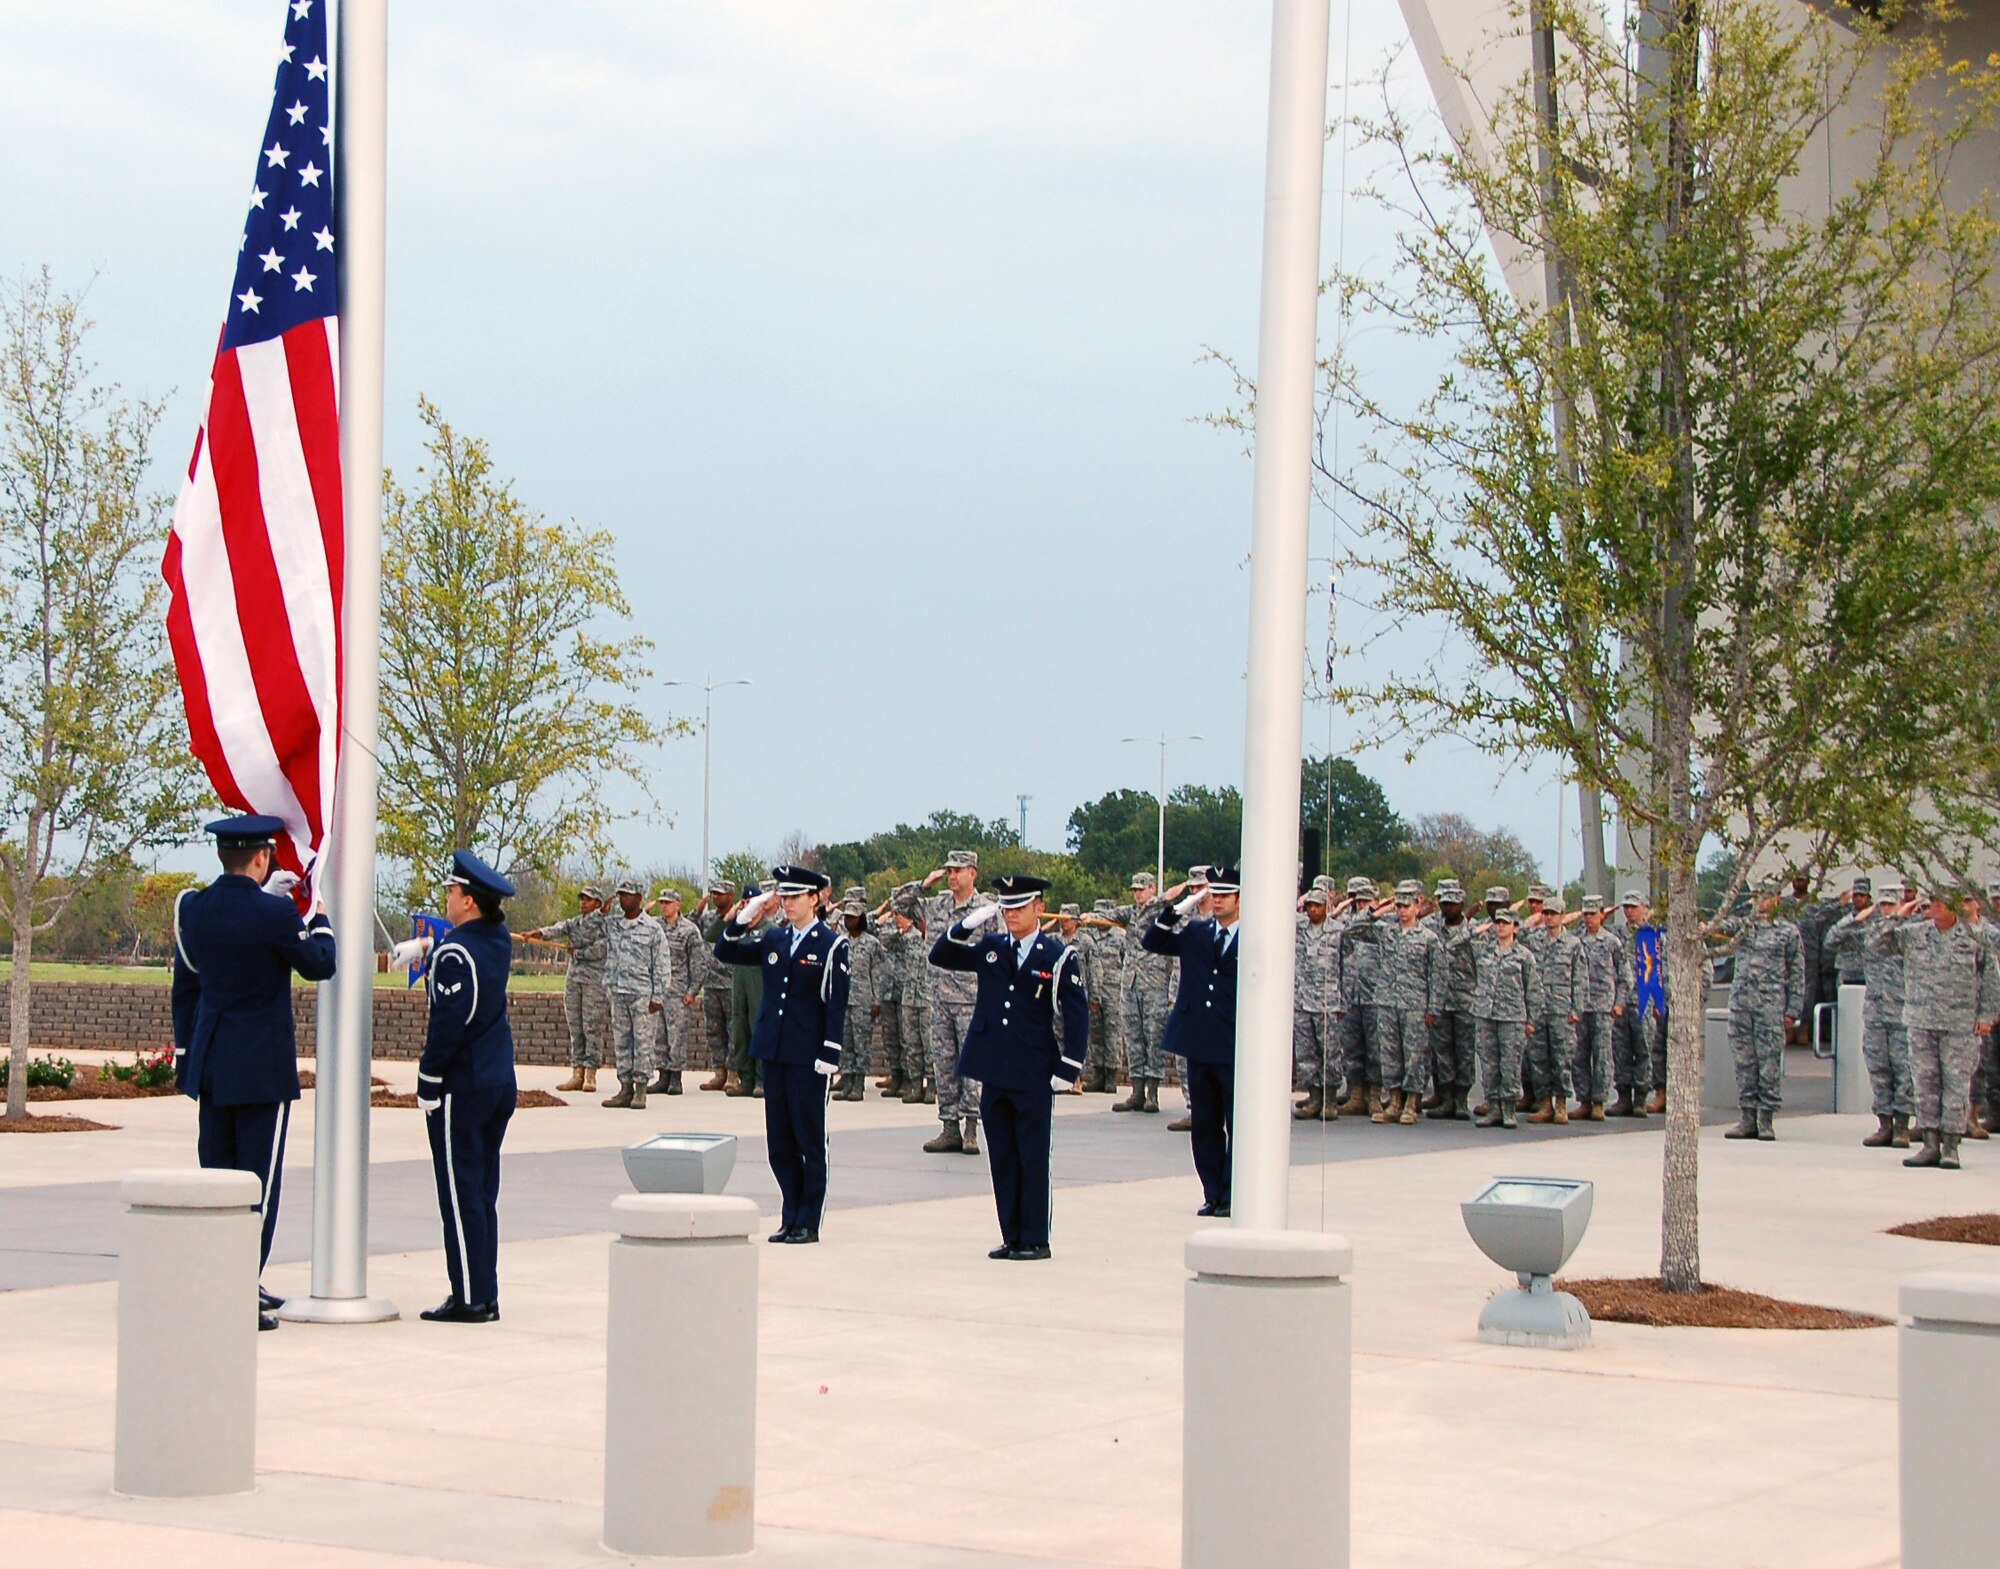 BOSSIER CITY, La. - Members of the Eighth Air Force Headquarters, 608th Air and Space Operations Center and 608th Air Communications Squadron salute the U.S. flag during a reveille ceremony at the Cyber Innovation Center in celebration of the Air Force’s 64th birthday Sept. 16. Sixty-four years ago, President Harry Truman signed the National Security Act of 1947, establishing the United States Air Force as a separate military service. Since Sept. 18, 1947, the U.S. Air Force – through its Airmen and technology – has played a key role in the defense of the U.S., maintenance of peace and humanitarian operations around the world. (U.S. Air Force photo by Staff Sgt. Brian Stives)